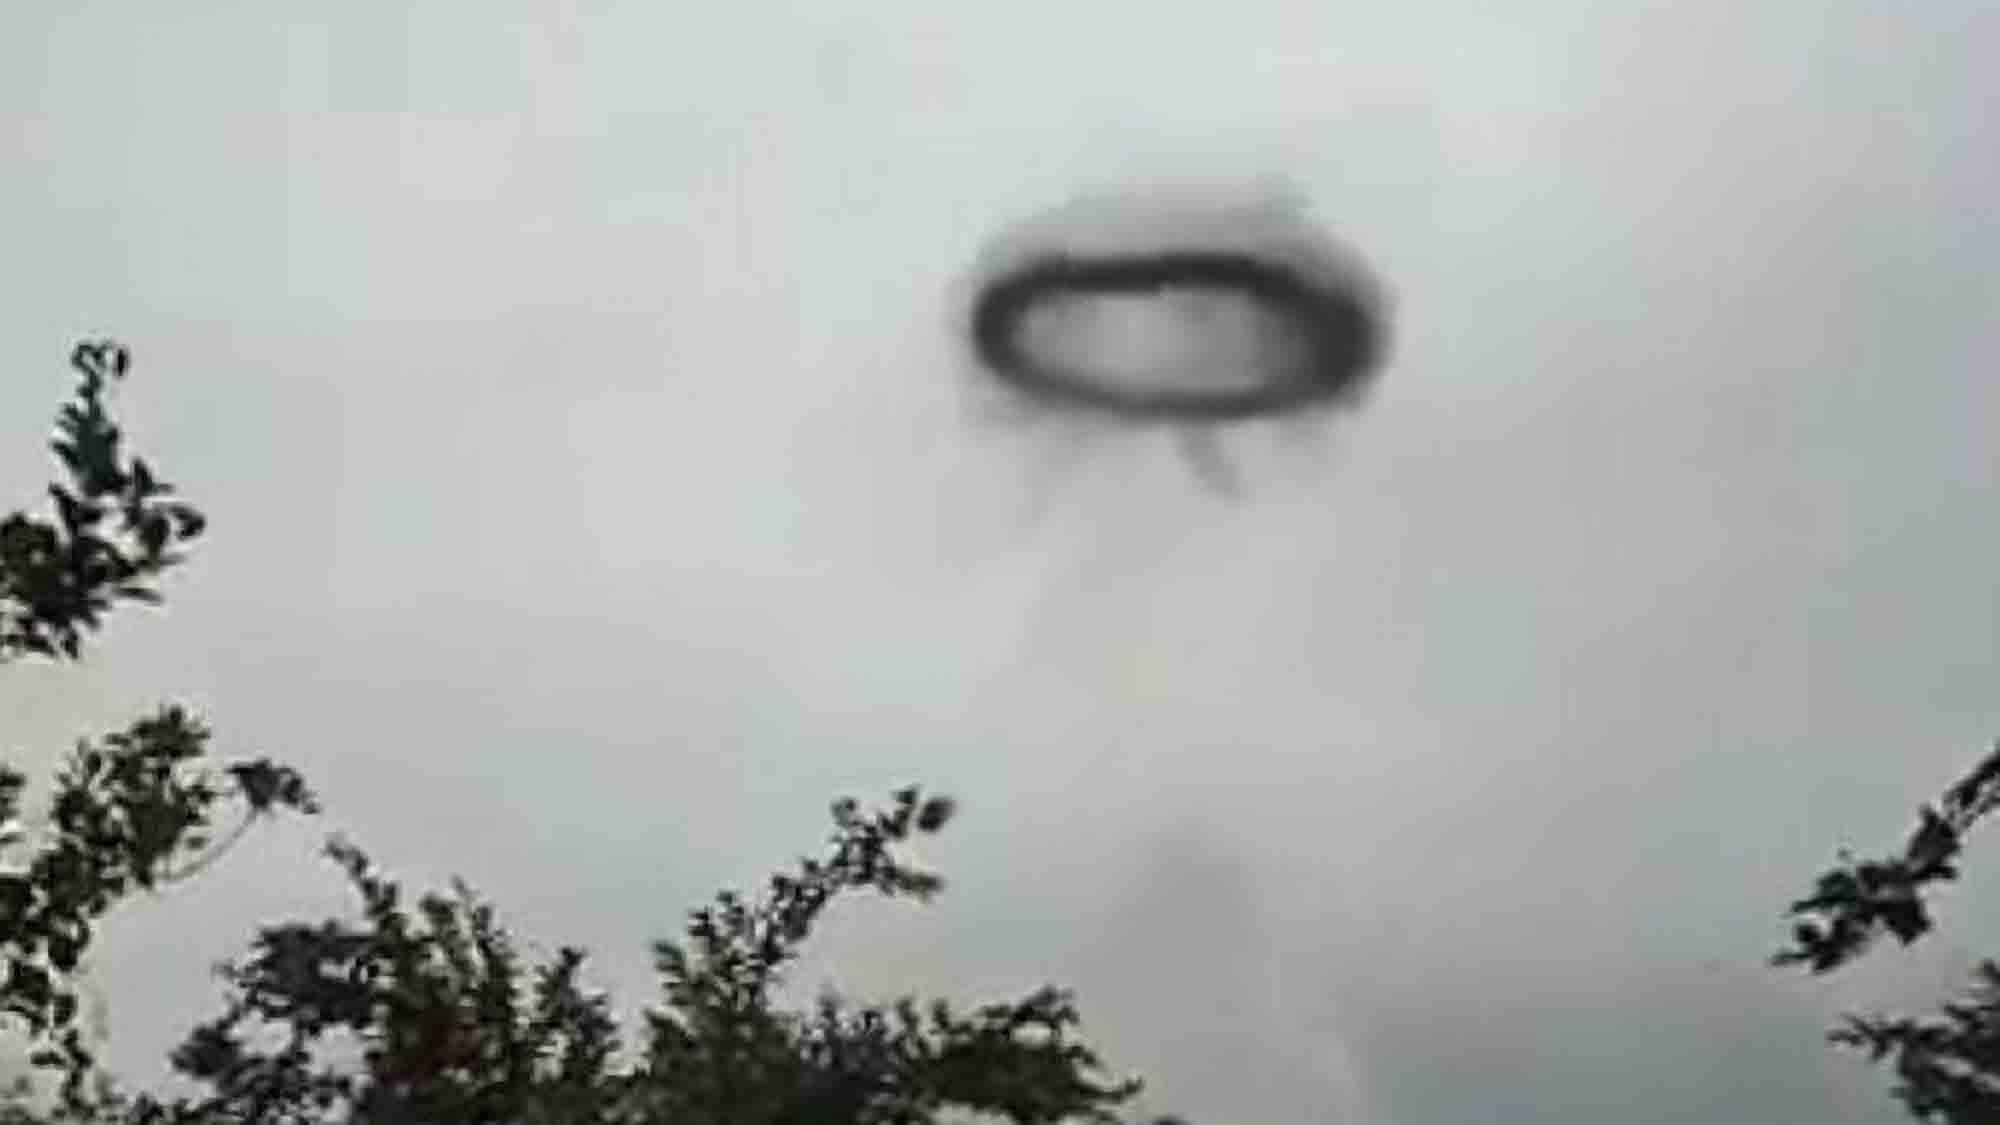 Was Sinister Black Hole In Sky ET Or Mozzies?